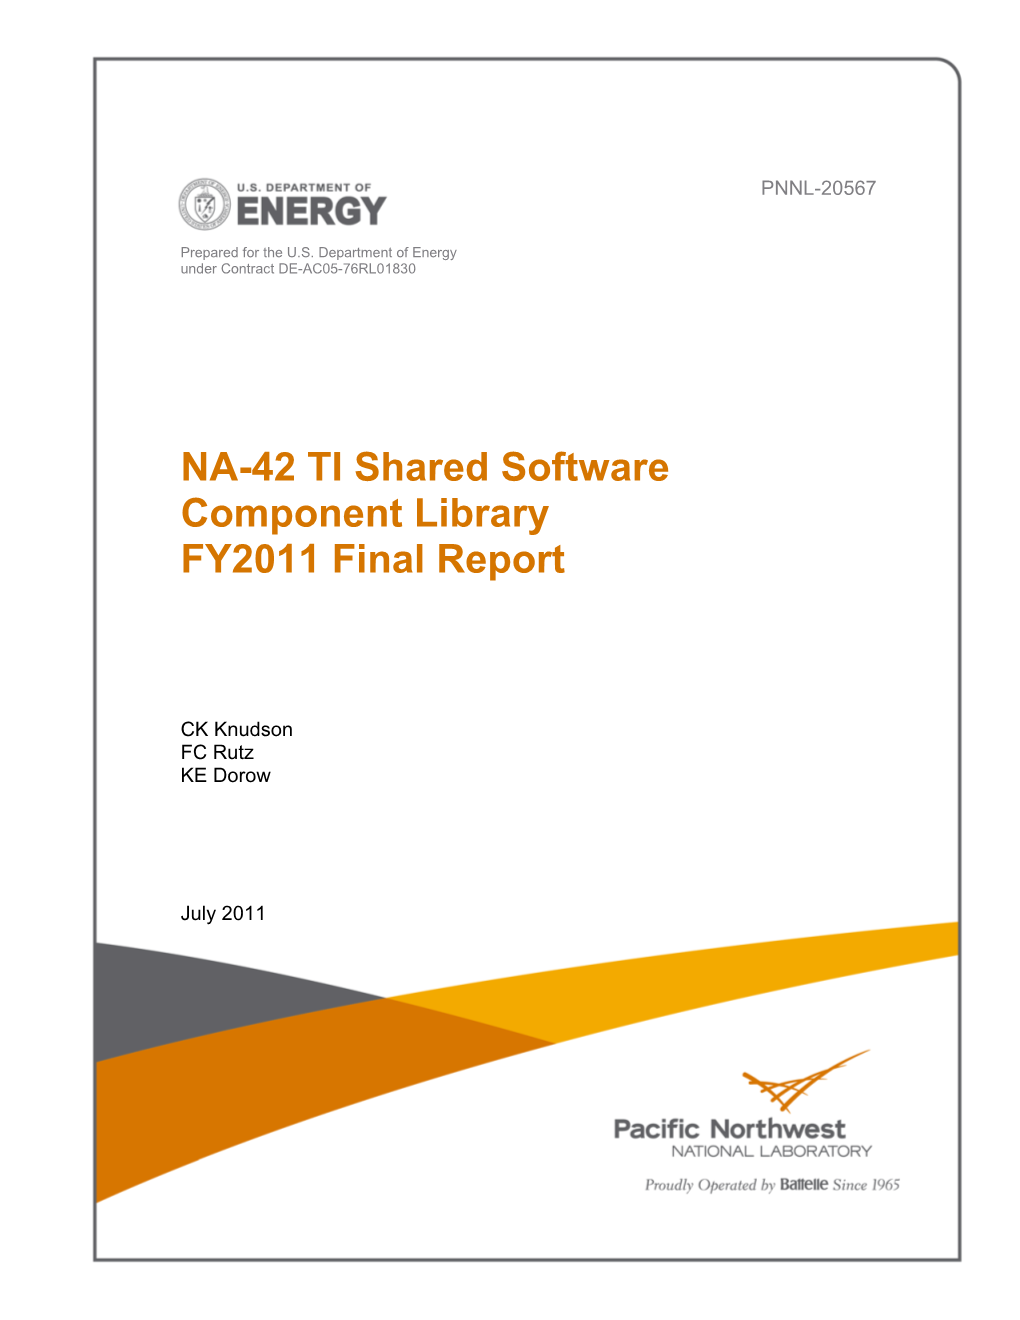 NA-42 TI Shared Software Component Library FY2011 Final Report